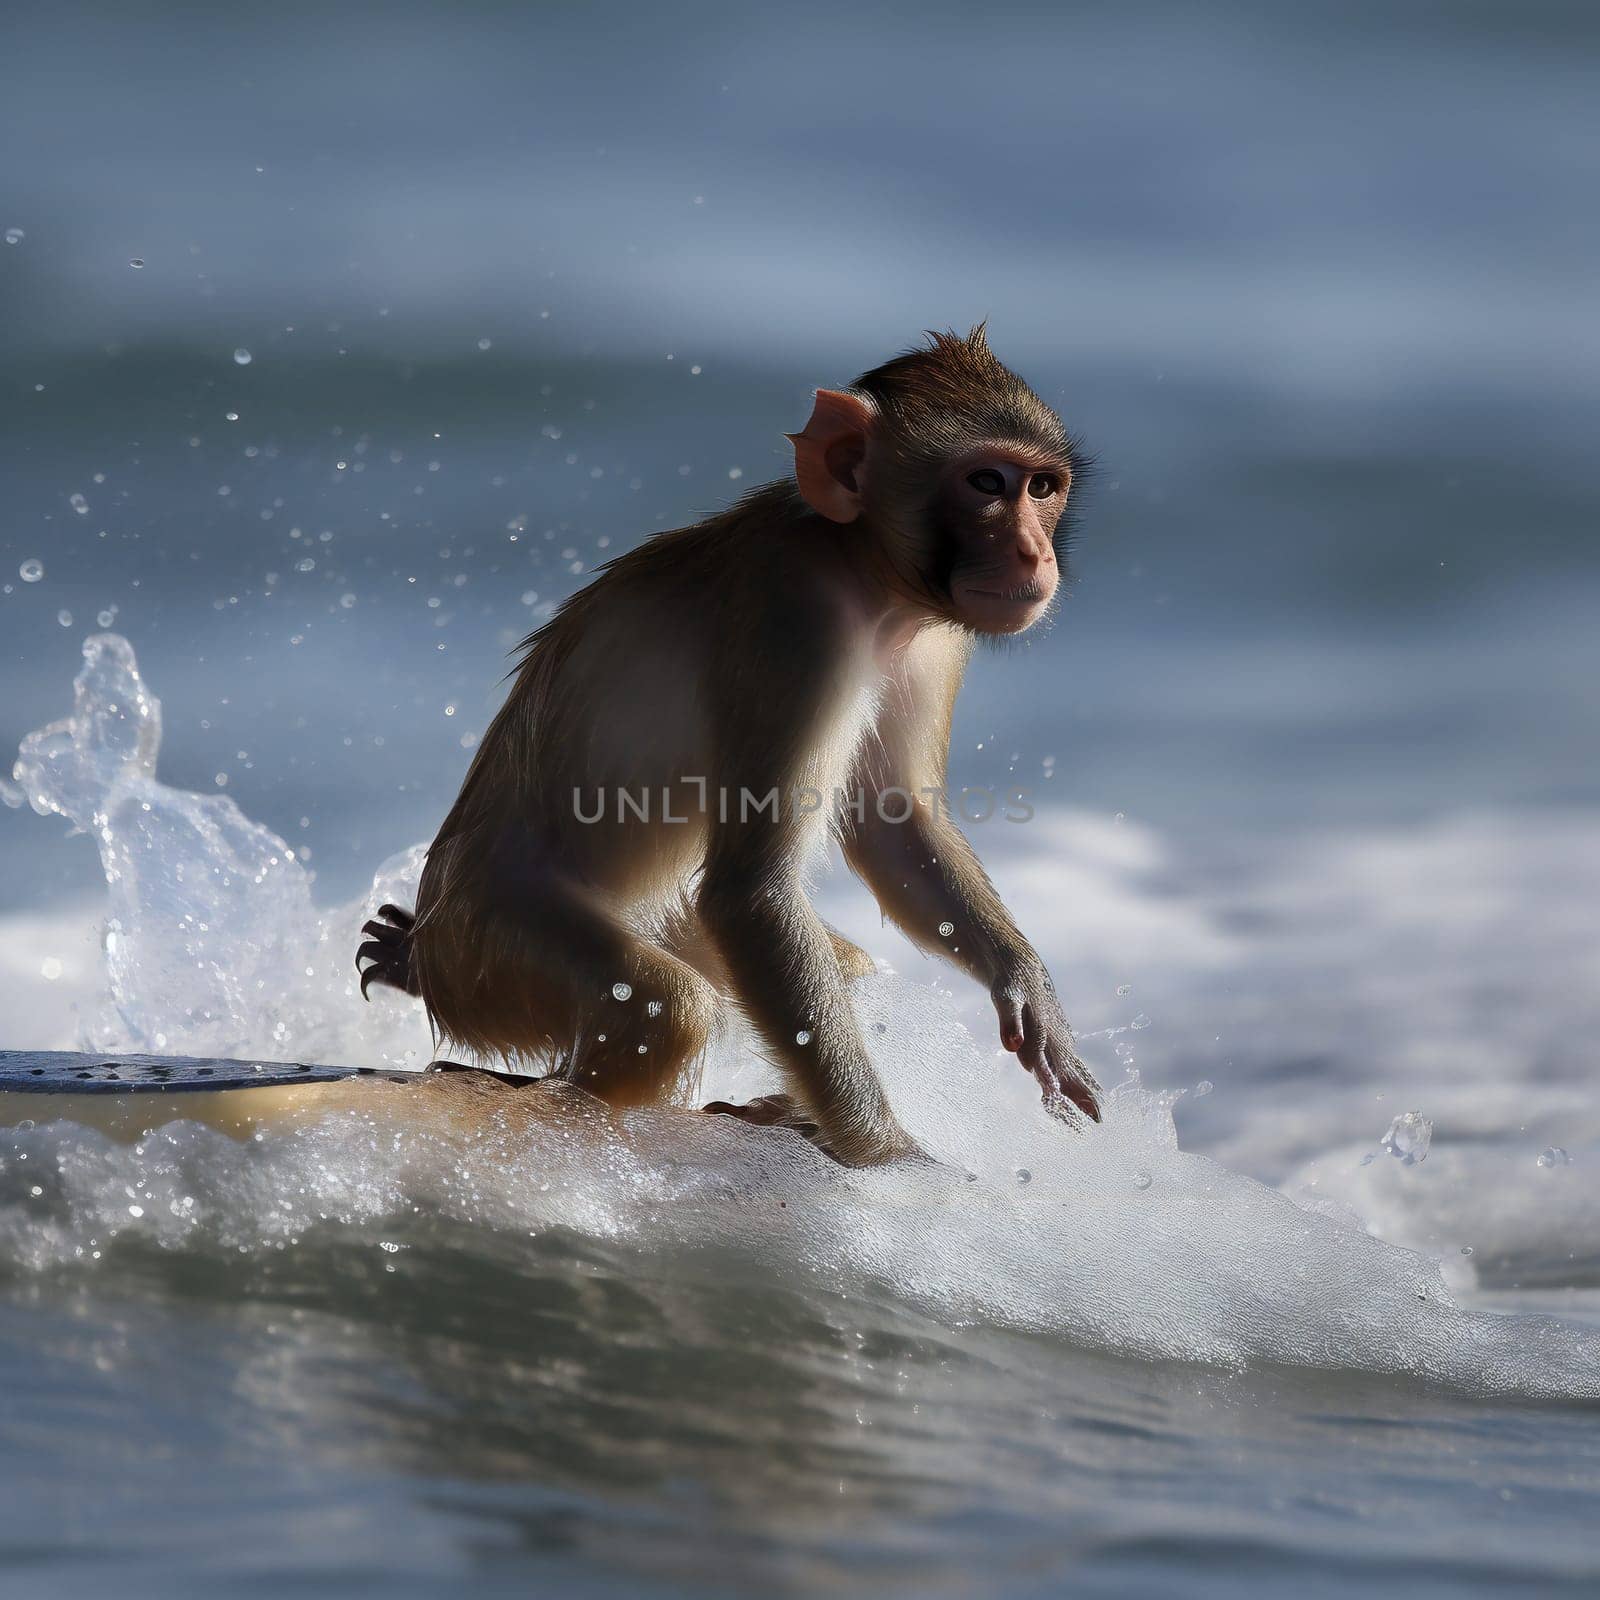 Monkey animal playing on beach in sea - side portrait. Animal primate surfer waiting for wave. Wildlife concept